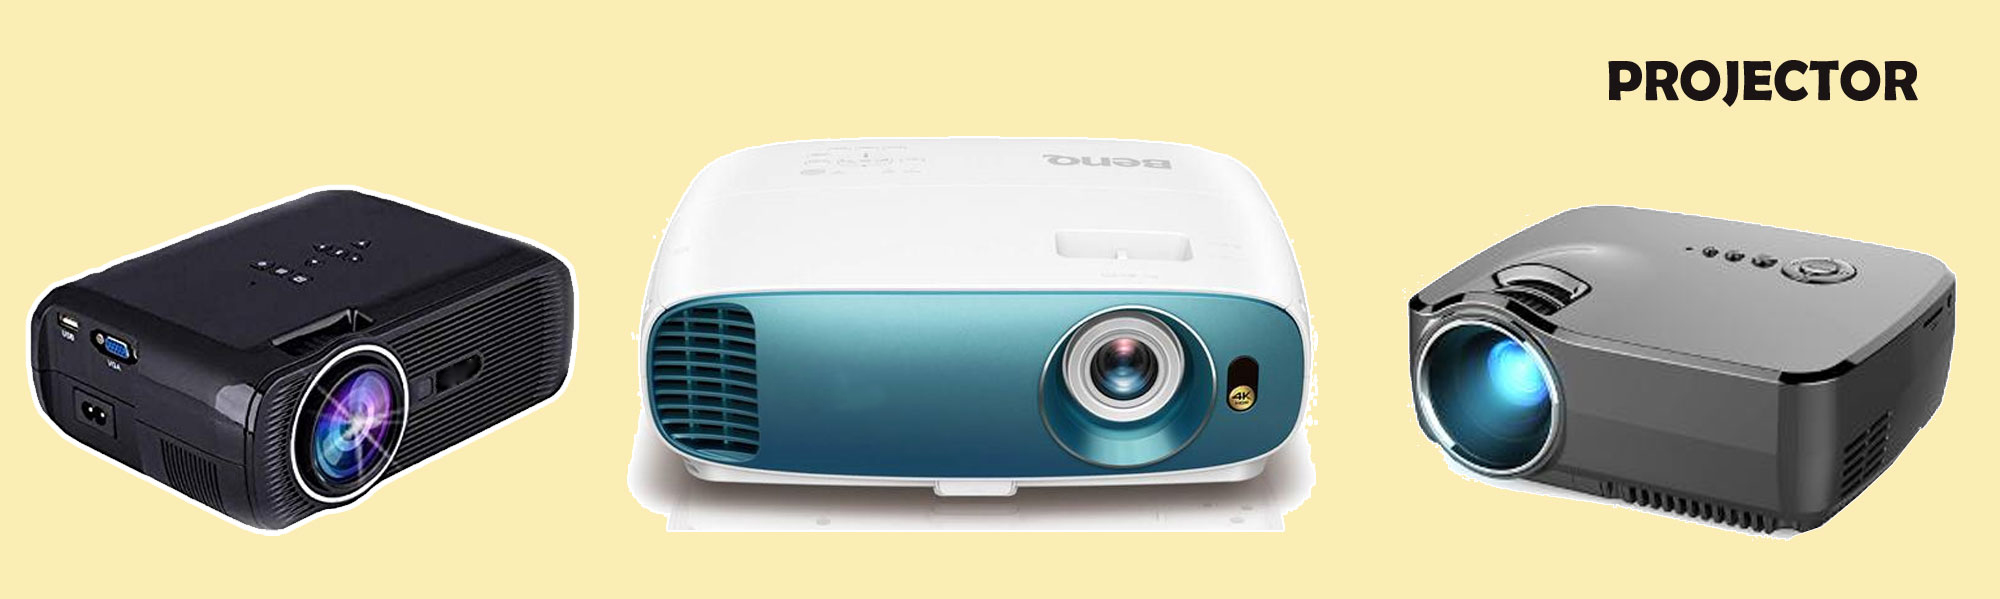 Epson Projector on Rent